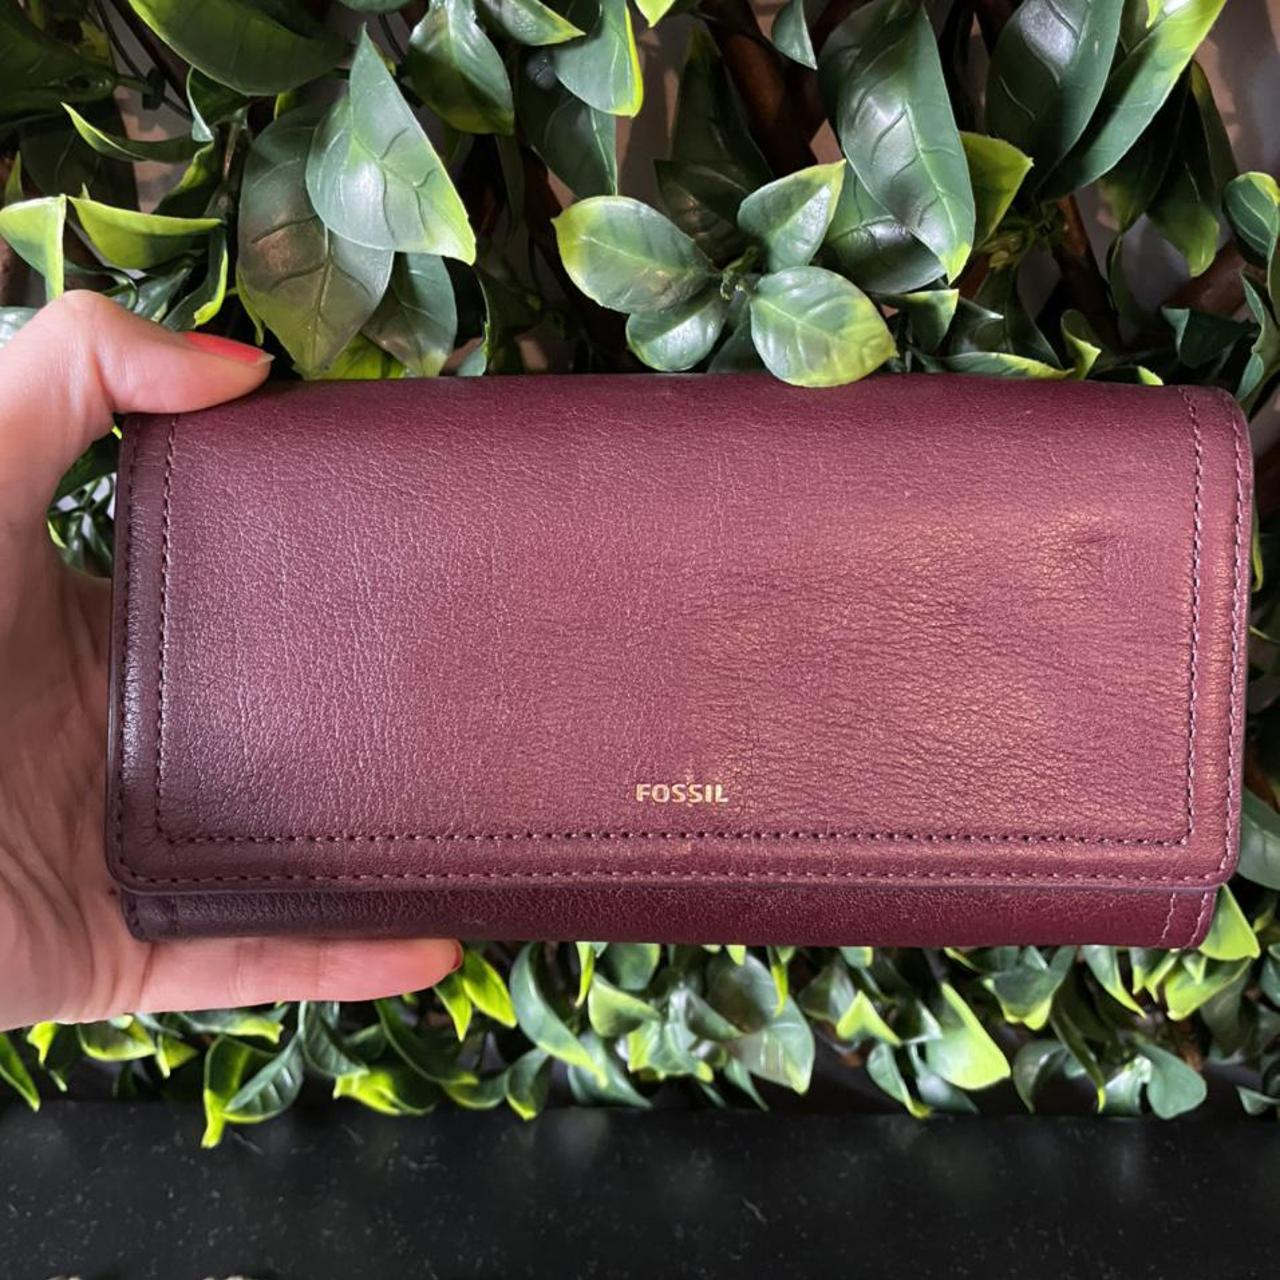 Fossil Purse. Gently used 🌹 | Fossil purse, Purses, Fossil